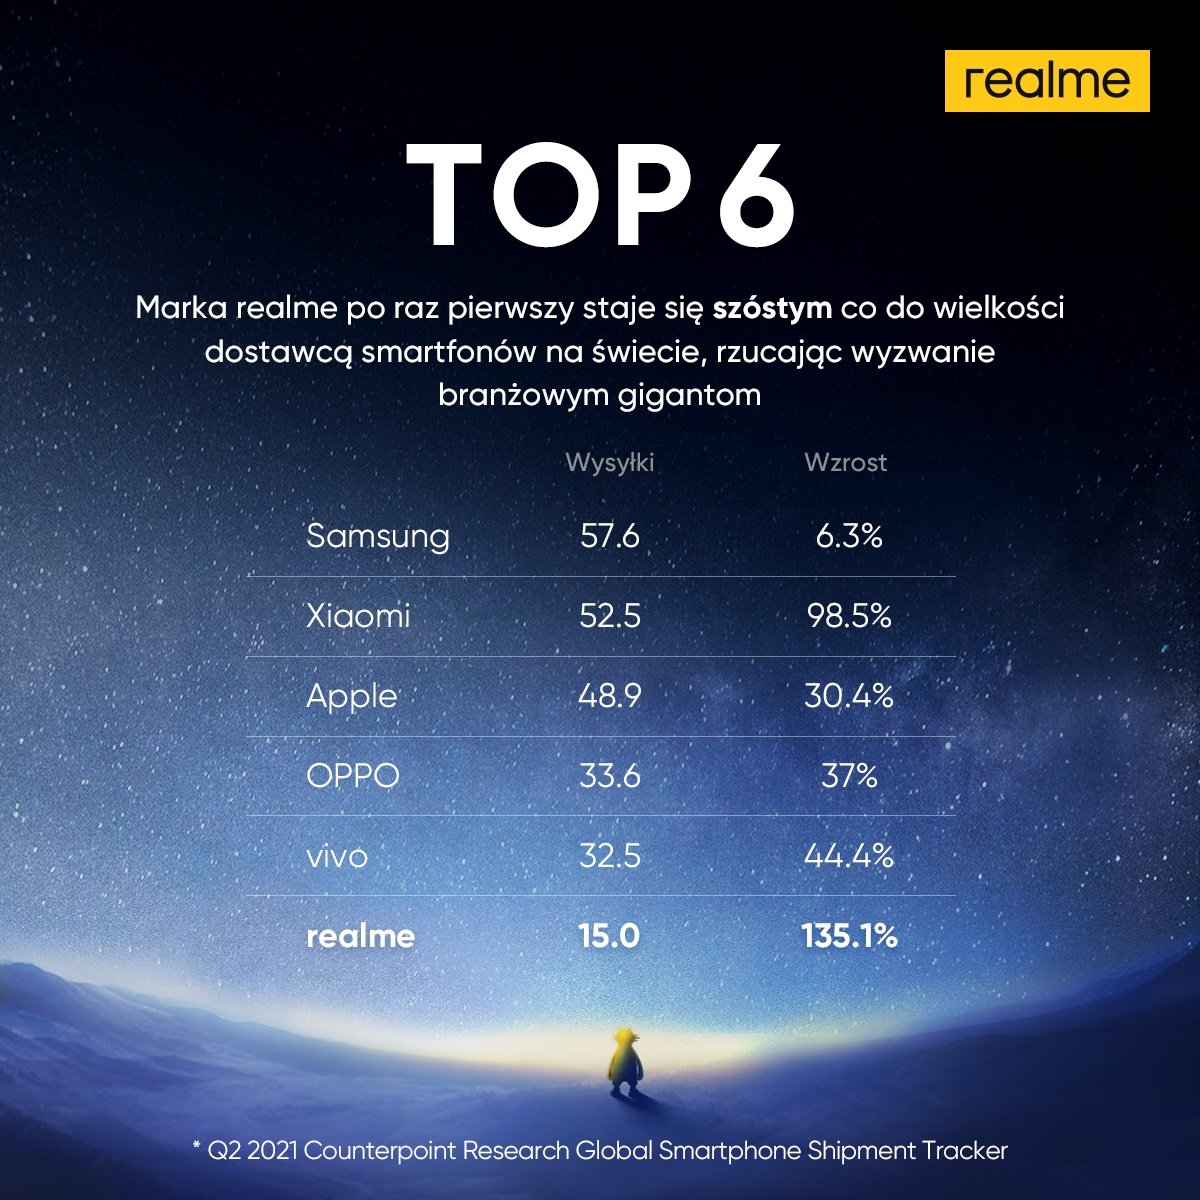 realme is one of the six largest smartphone brands in the world